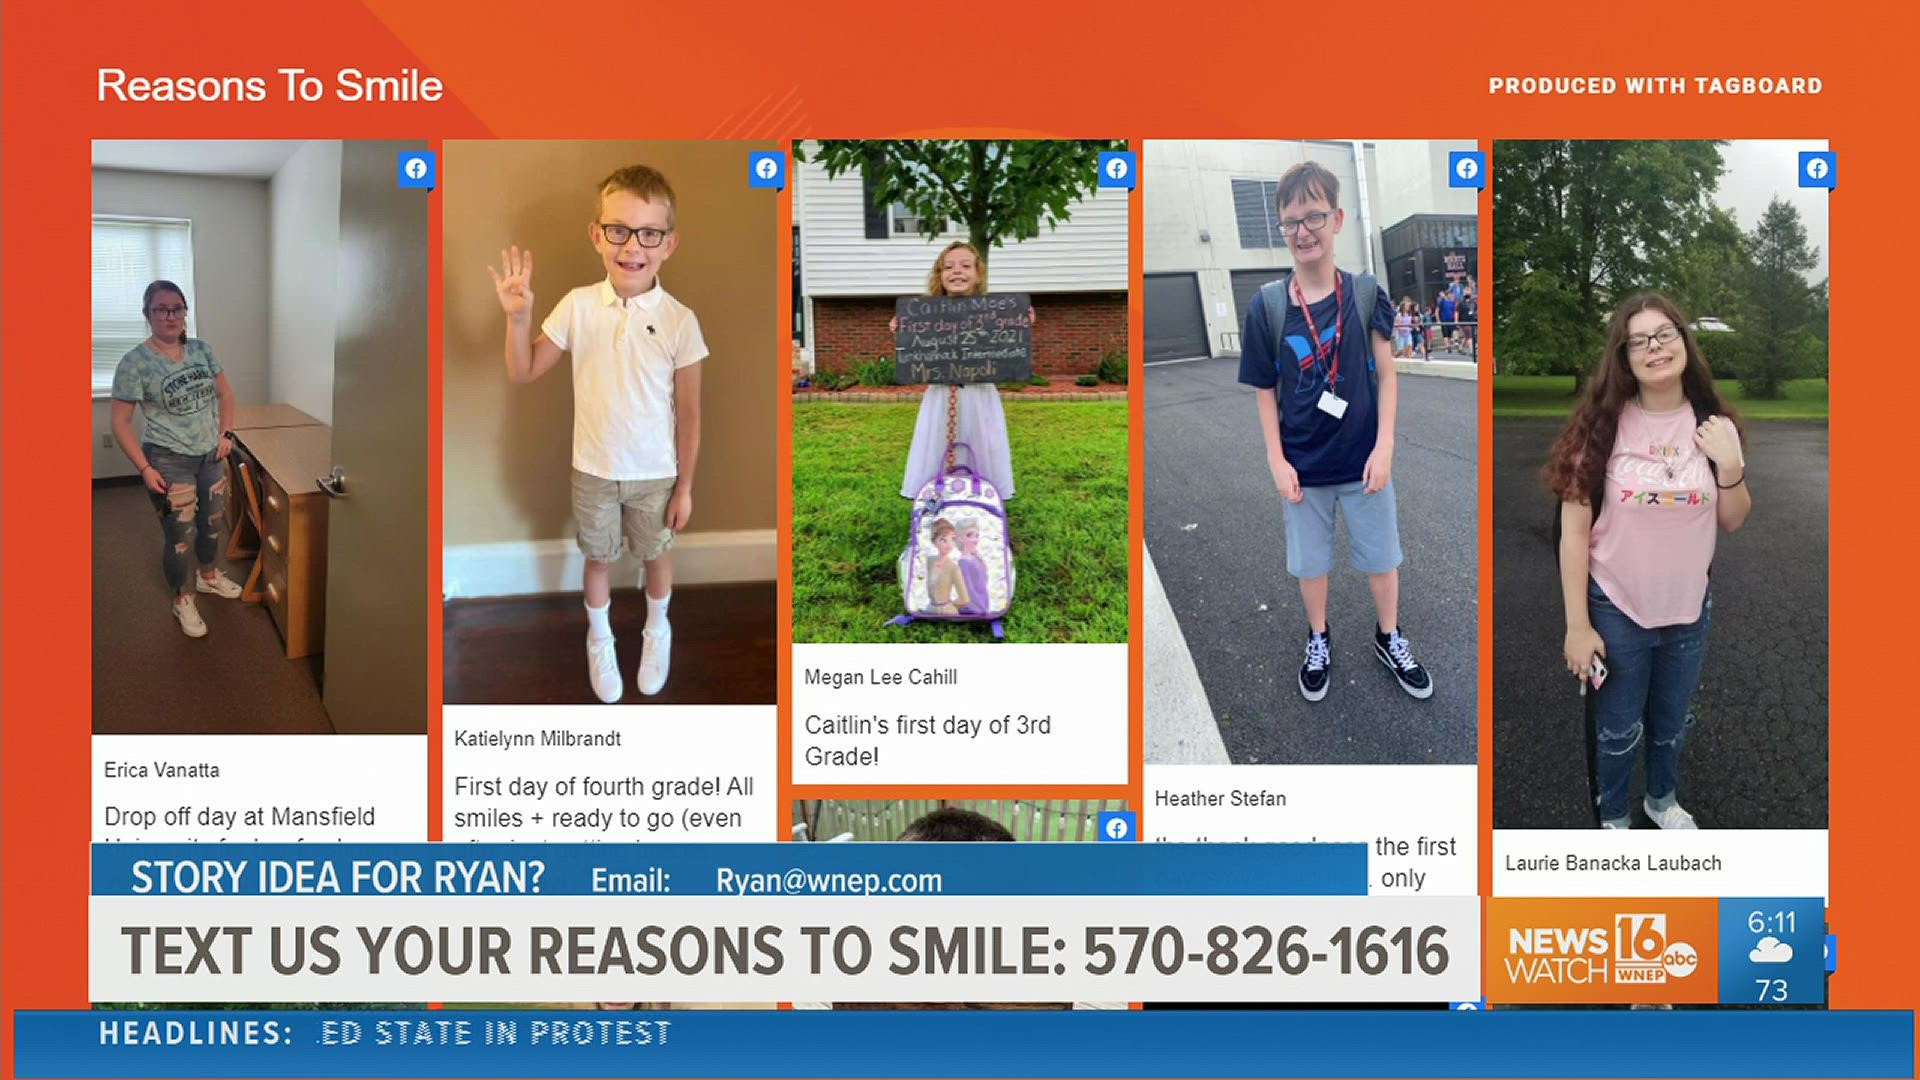 It's time for that Monday pick-me-up with our Reasons To Smile segment. Newswatch 16’s Ryan Leckey shared some of your snapshots celebrating back-to-school moments.